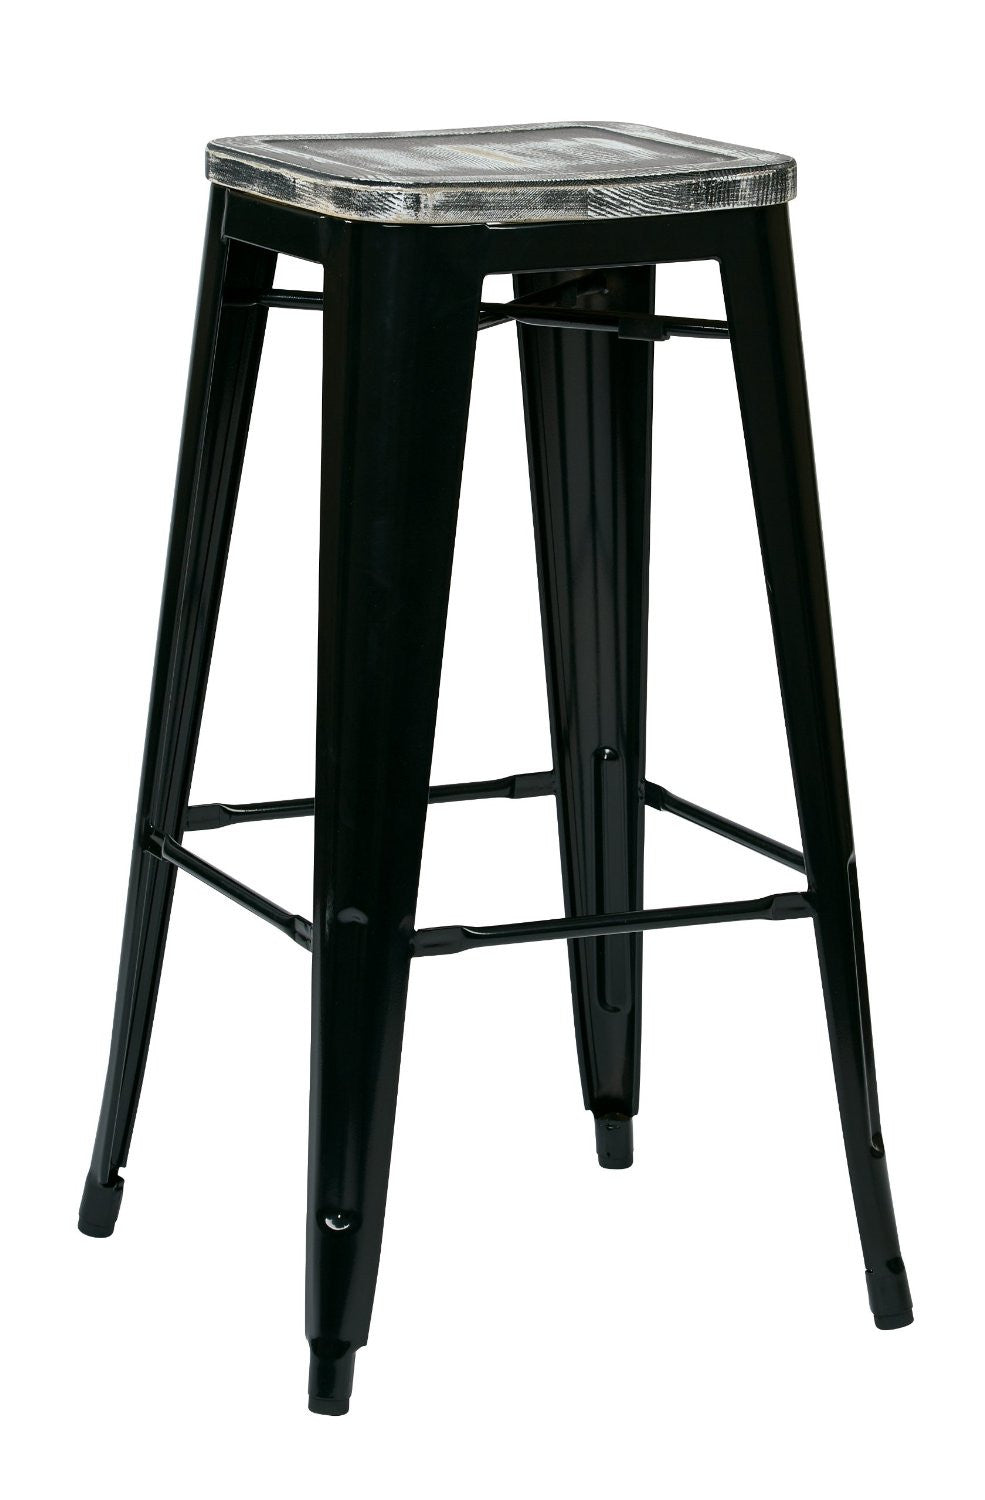 Osp Designs Brw31303a4-c306 Bristow 30" Antique Metal Barstool With Vintage Wood Seat, Black Finish Frame & Pine Alice Finish Seat, 4 Pack